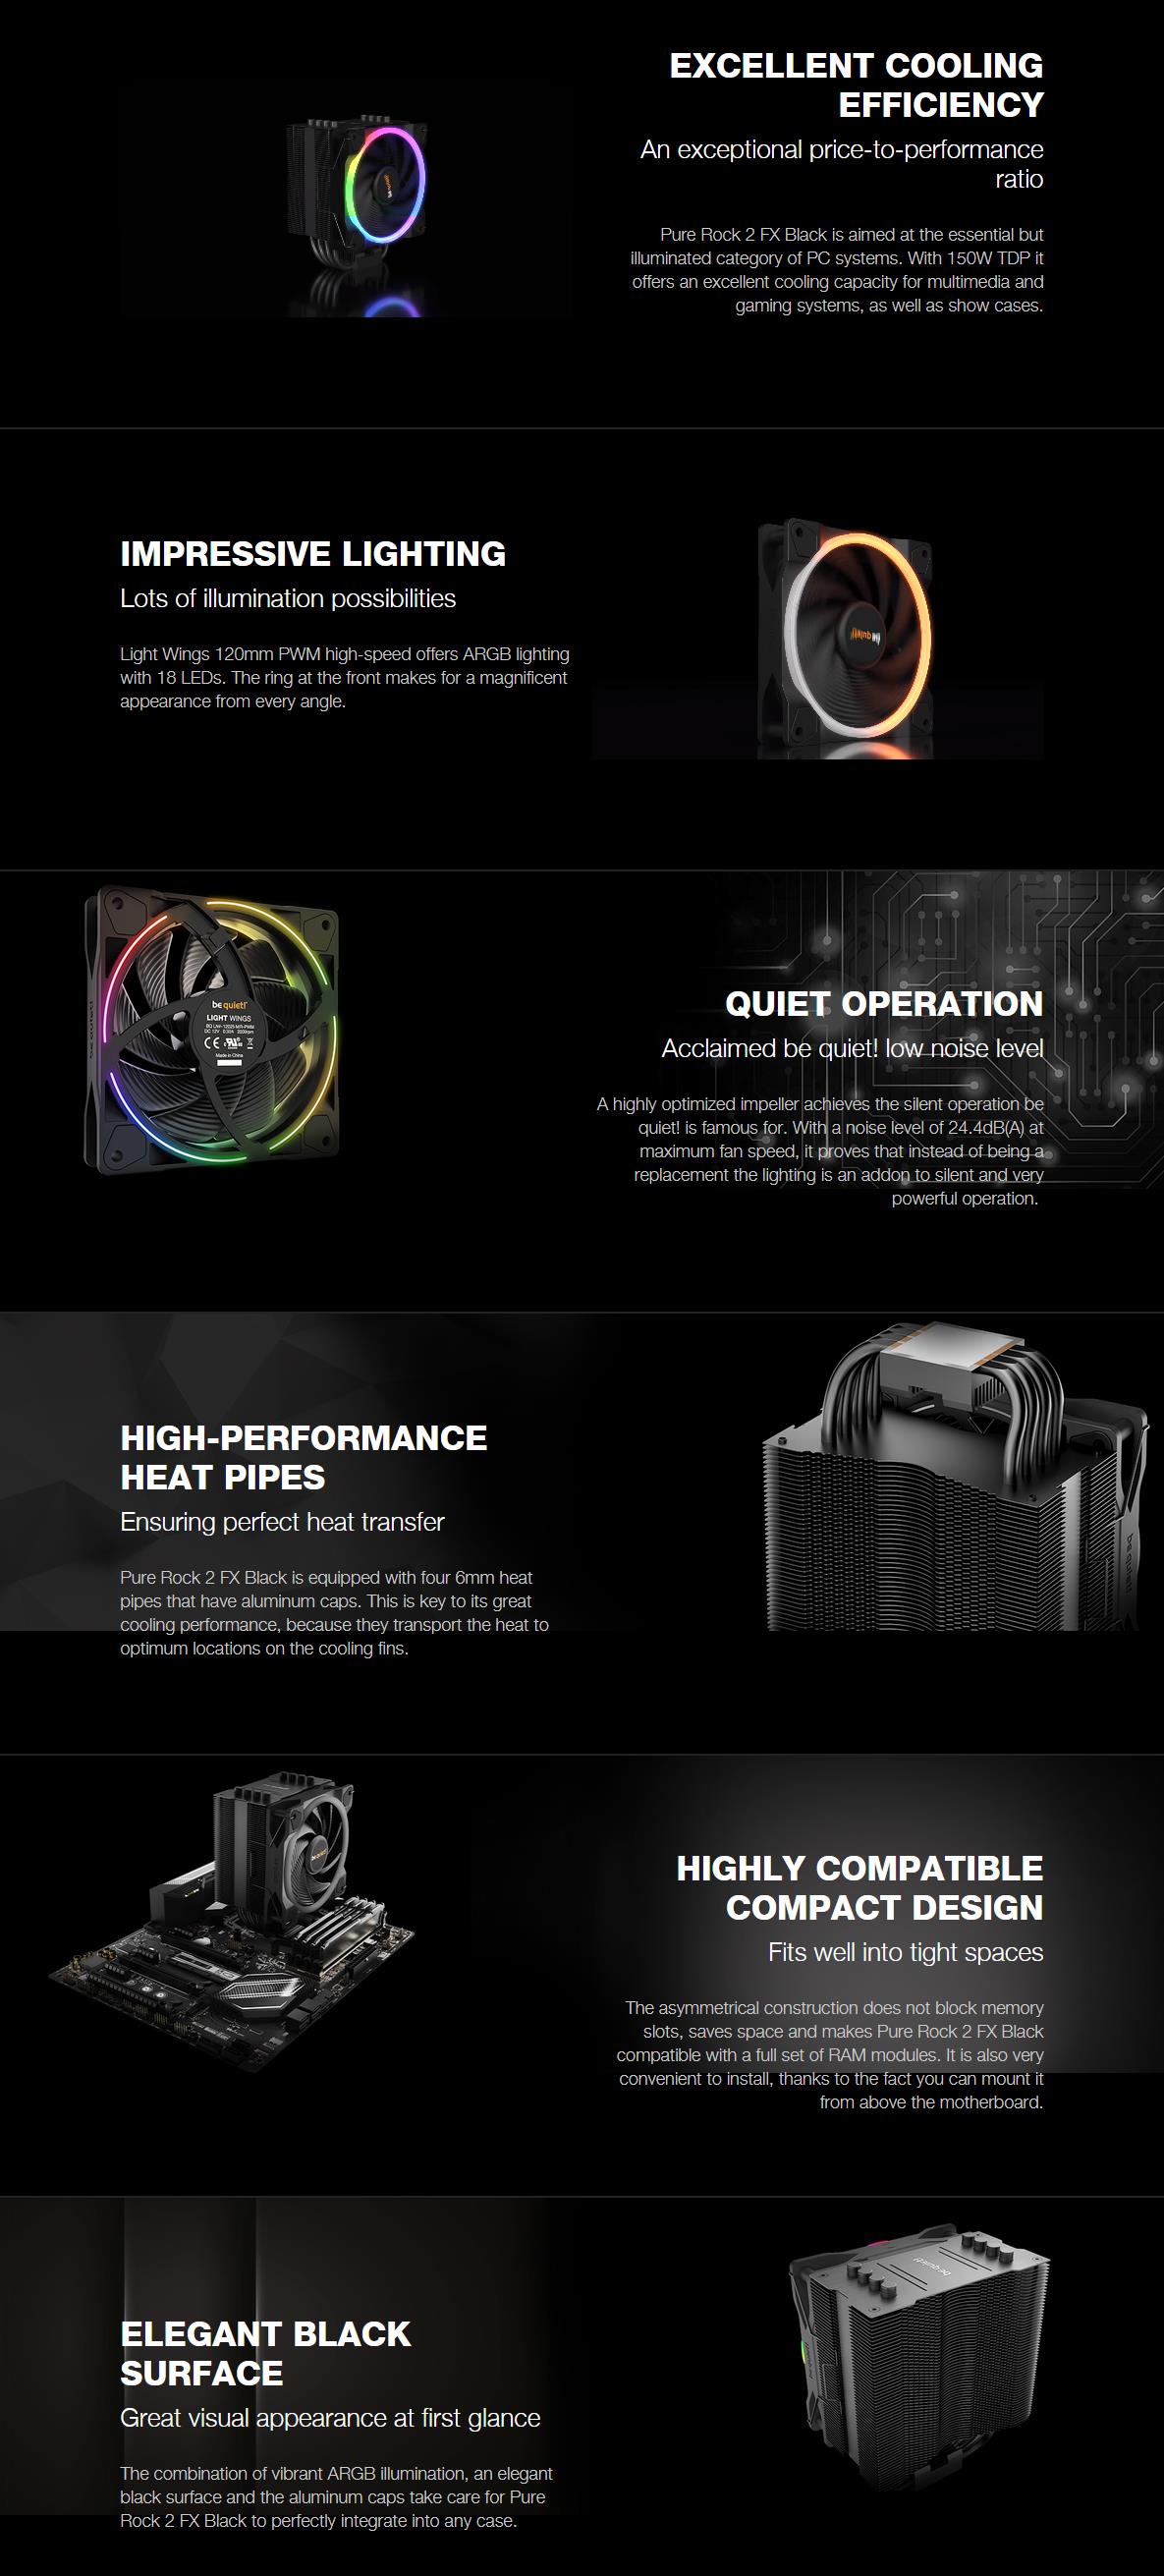 A large marketing image providing additional information about the product be quiet! Pure Rock 2 FX CPU Cooler - Additional alt info not provided